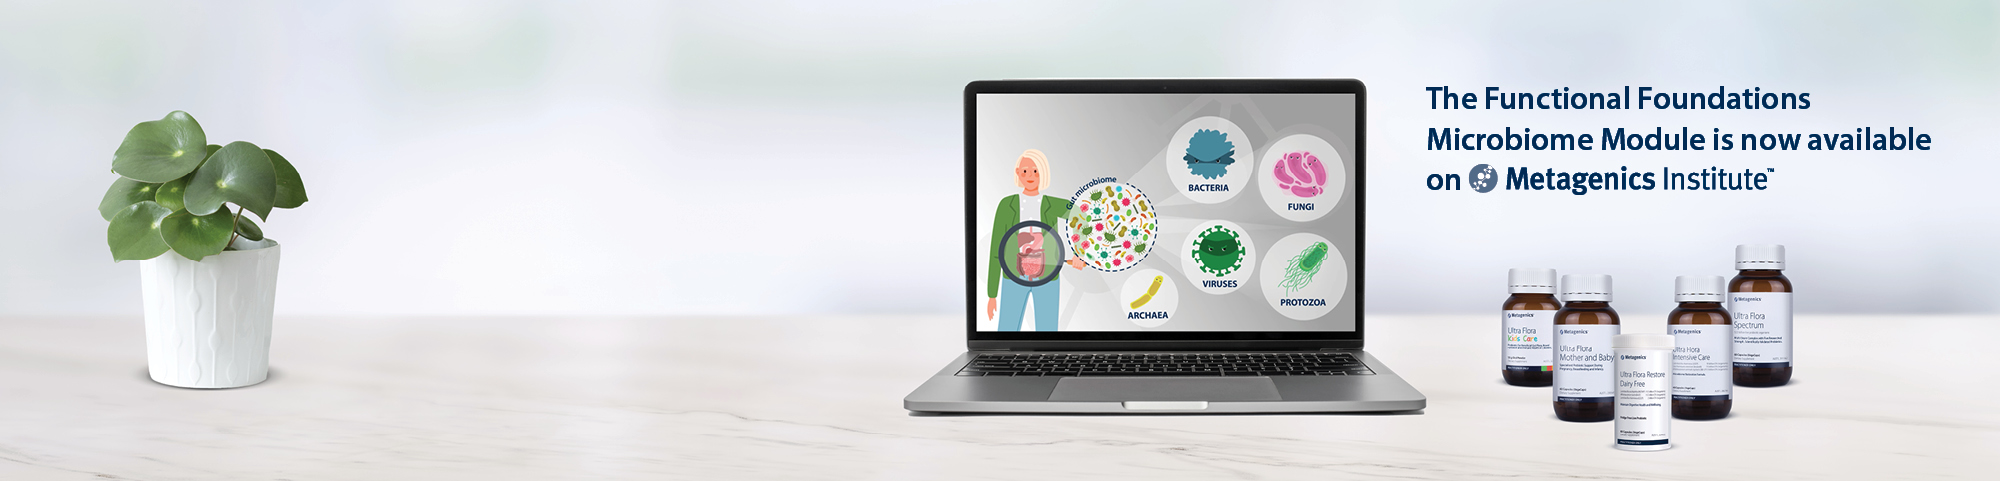 The Functional Foundations Microbiome Module is now available on Metagenics Institute